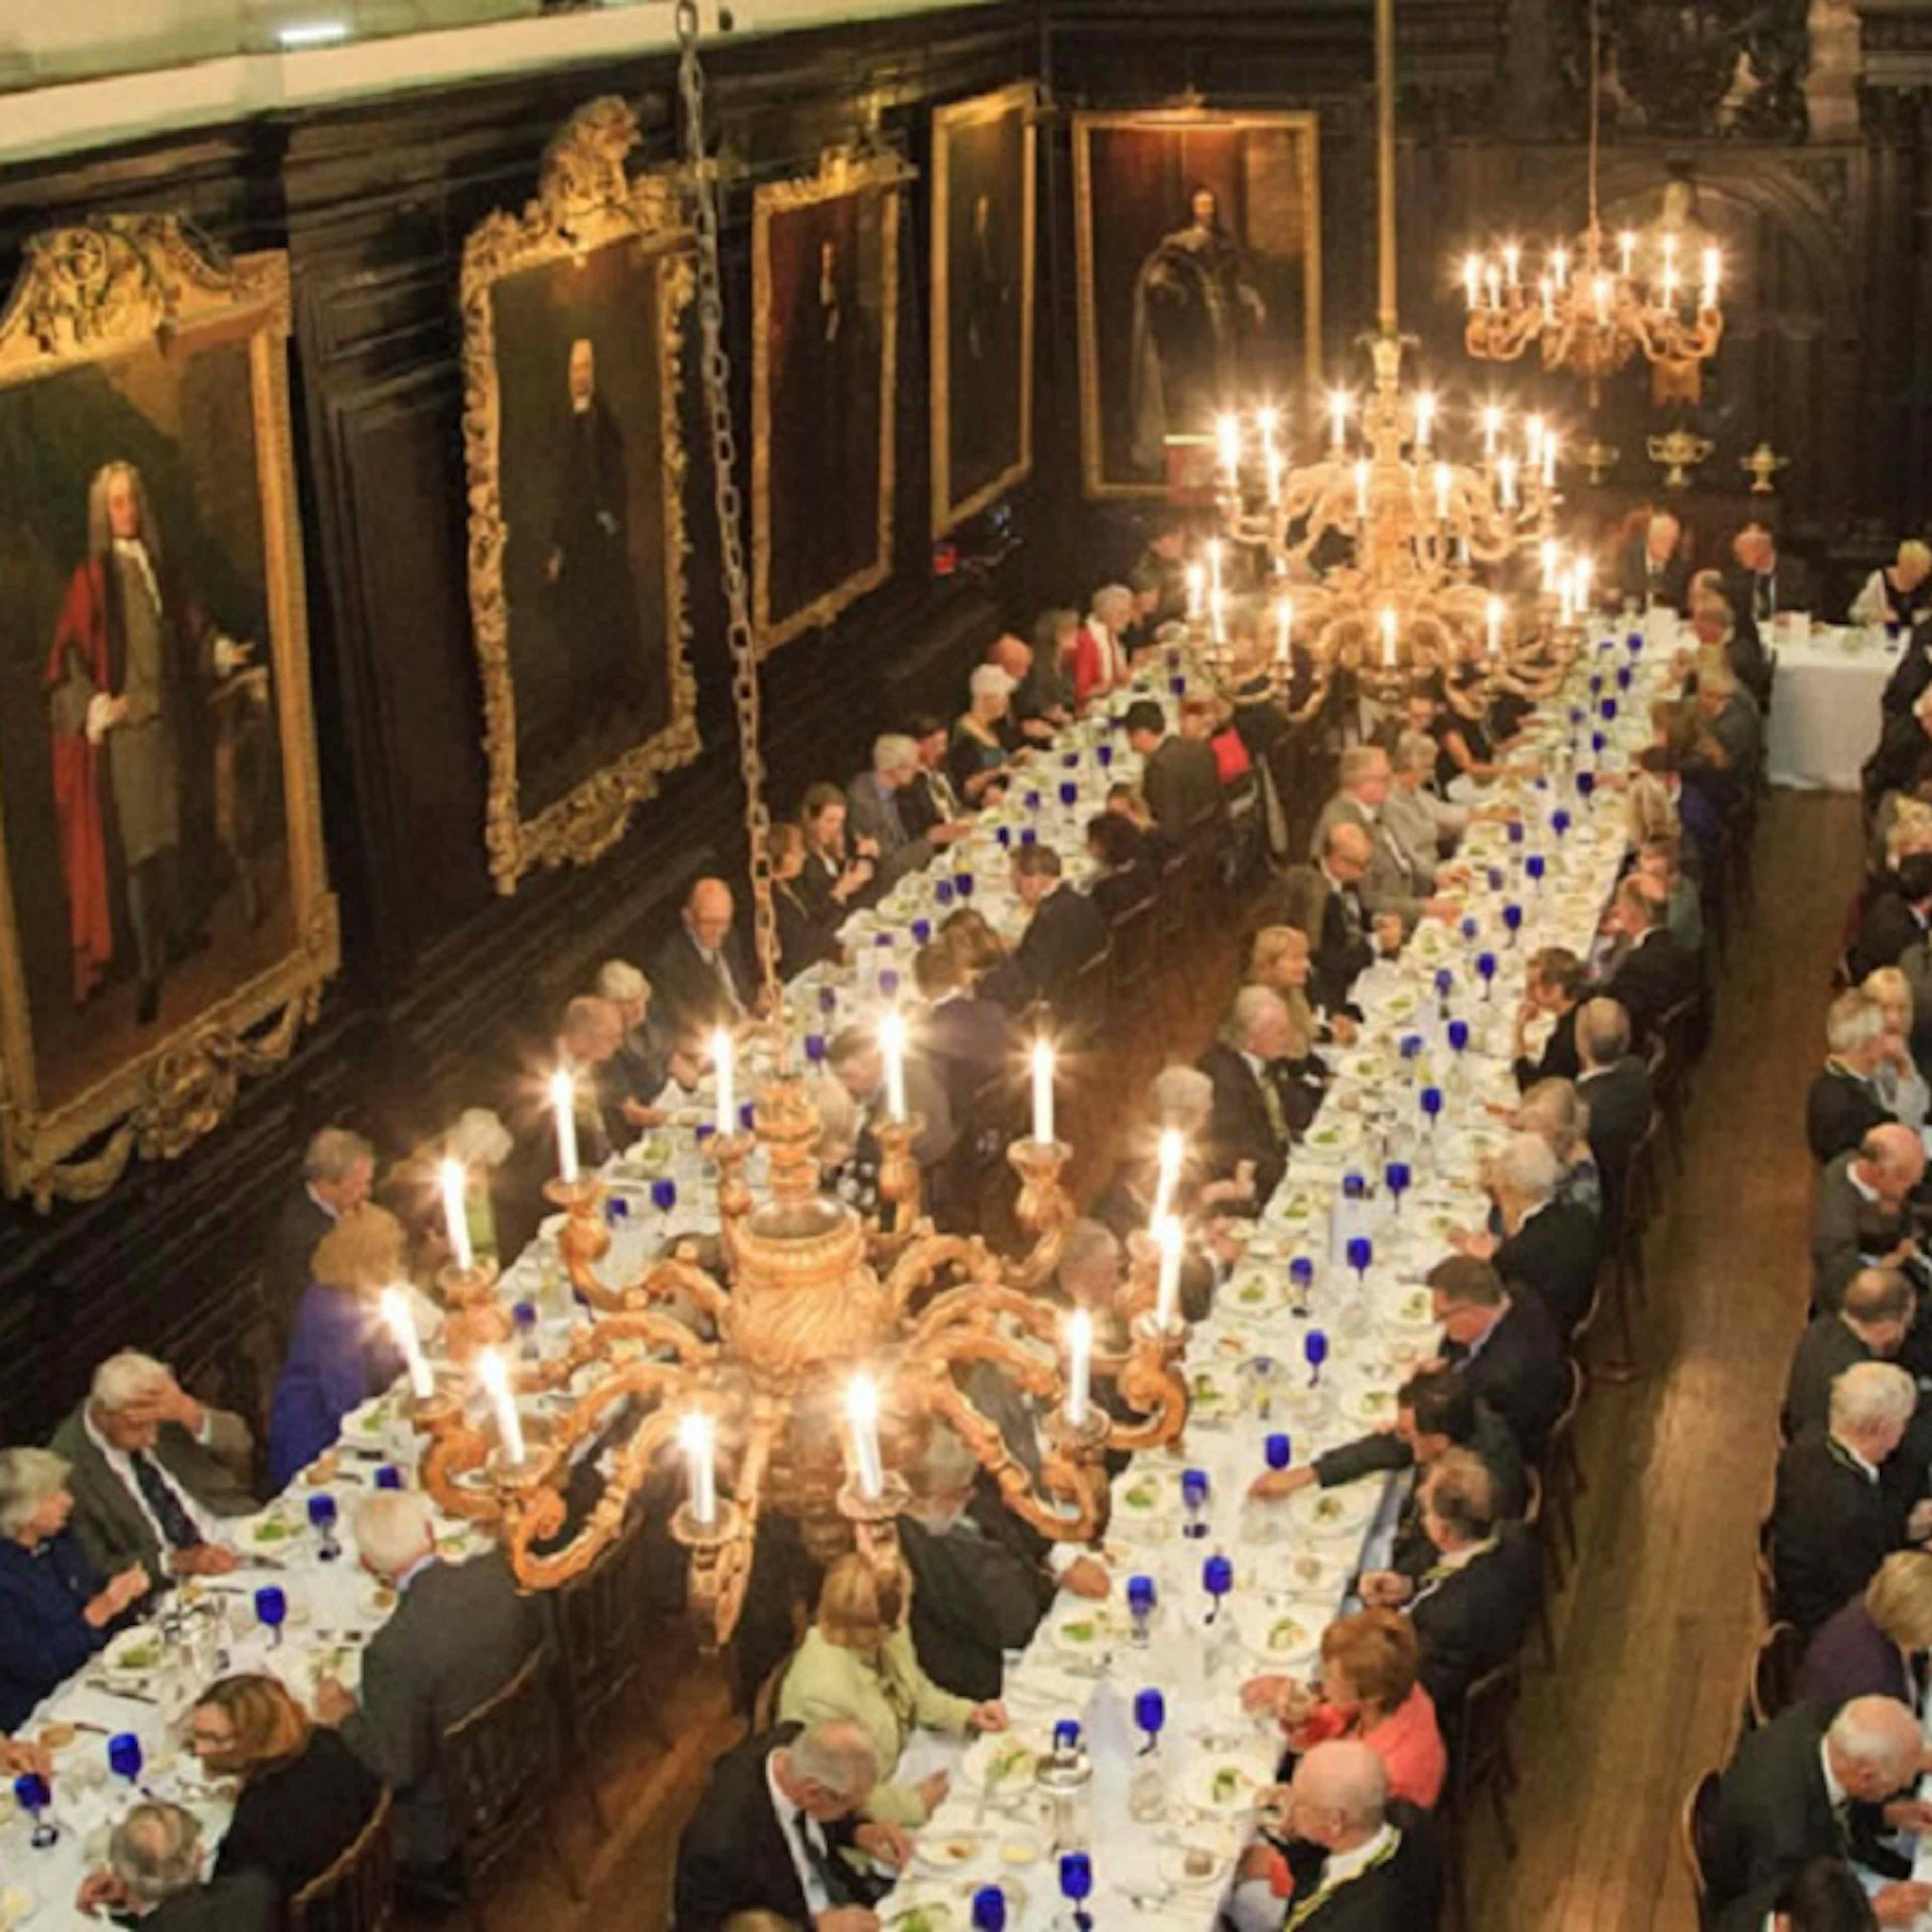 Apothecaries’ Hall  - Great Hall image 3